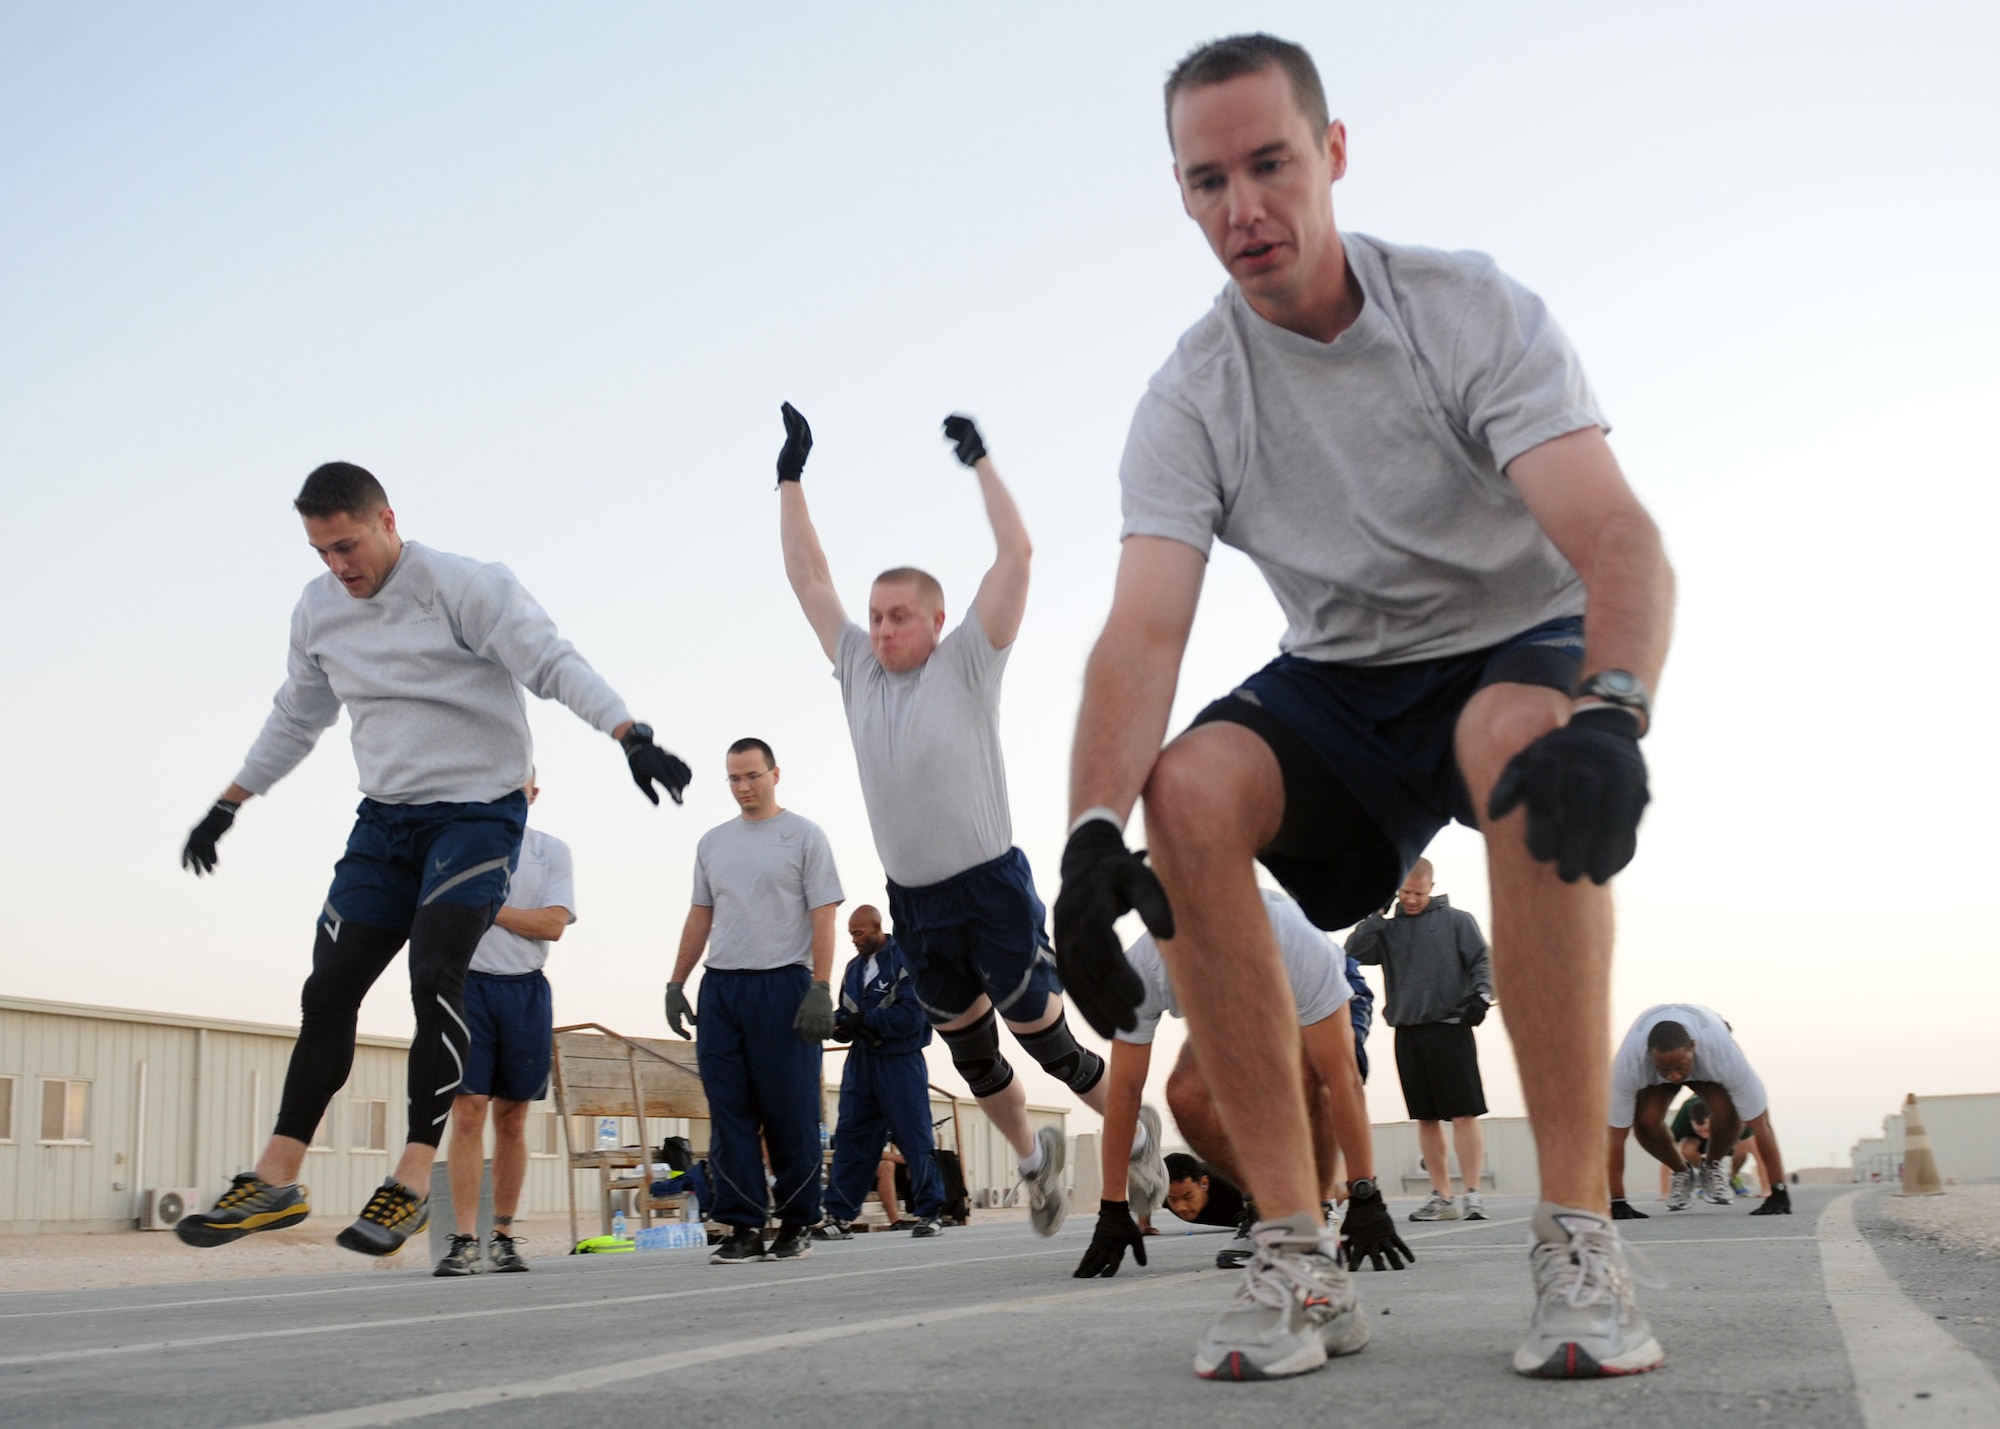 SOUTHWEST ASIA – Airmen from the 609th Air Communications Squadron Detachment 1 start the extreme burpee challenge Dec. 1. The challenge was to complete a mile of burpees around the 379th Air Expeditionary Wing track. One burpee consists of doing a complete pushup, then jump up while leaping forward and repeat the process. (U.S. Air Force photo/Senior Airman Joel Mease)